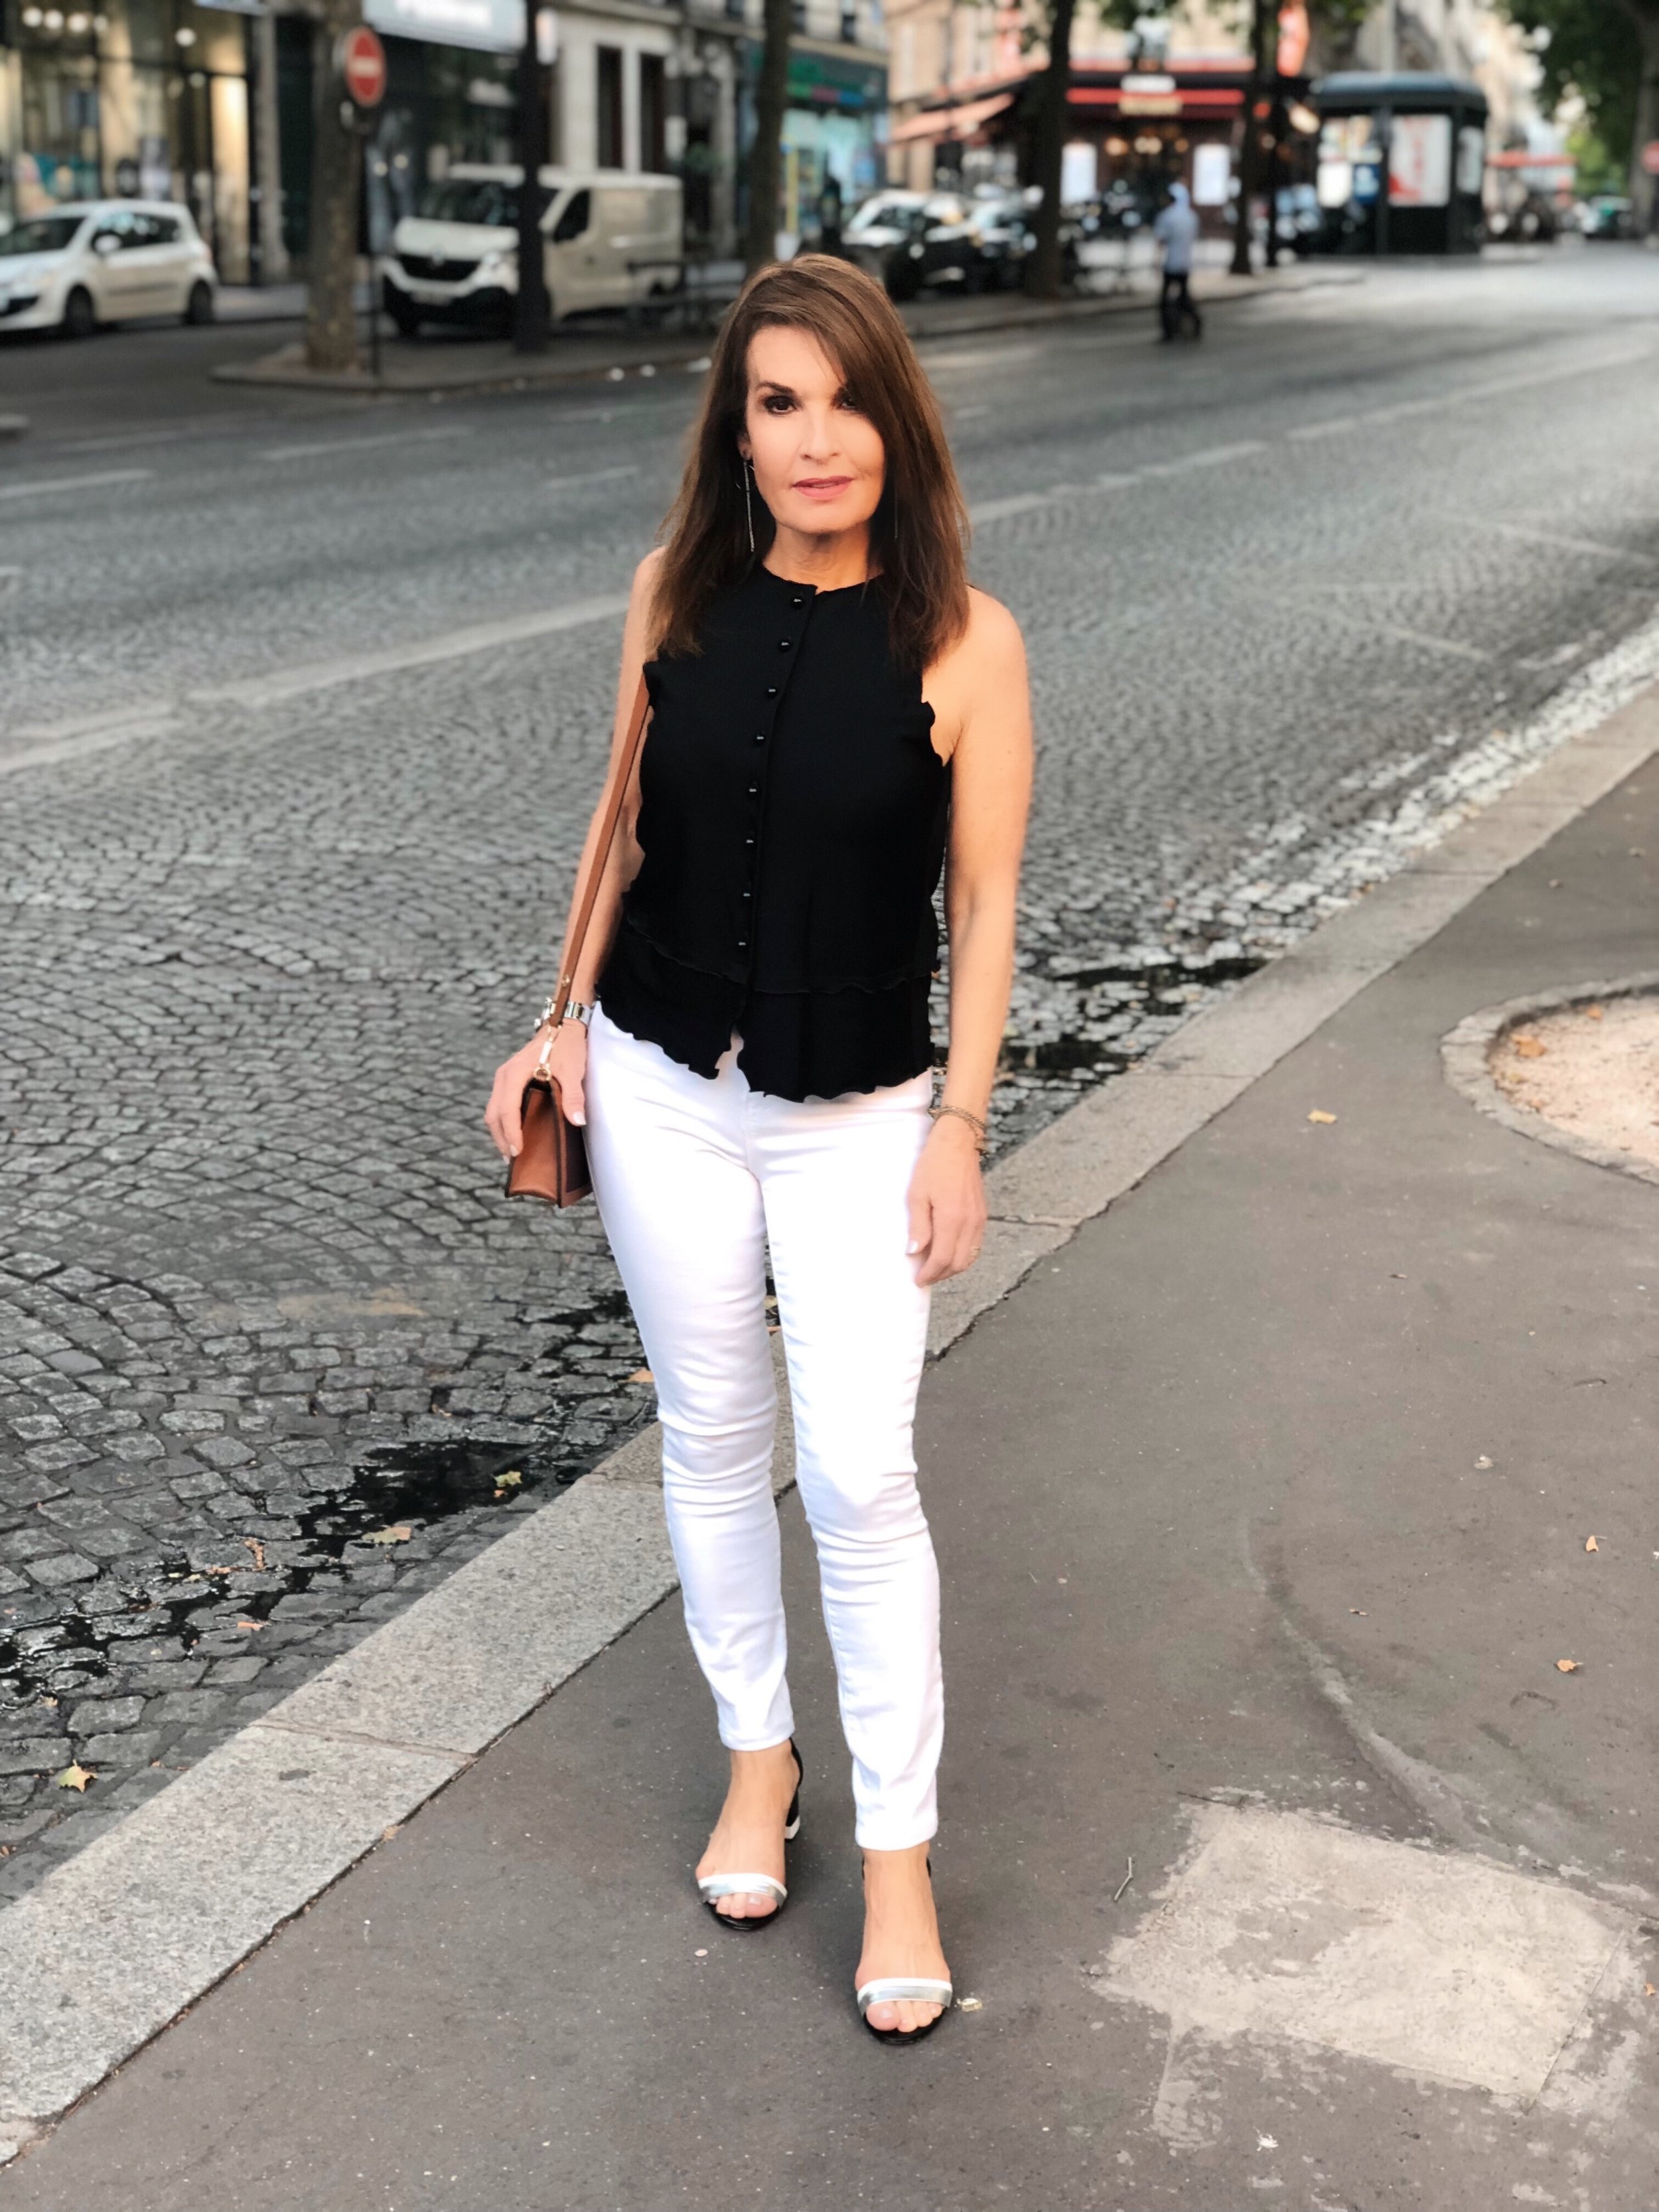  On our way to the French restaurant, Substance, where we had the delicious green gazpacho soup which inspired the one featured on this week’s food post! Armani top, L’Agence jeans, Pierre Hardy sandals, Louis Vuitton beltbag worn as a shoulder bag, Merav Shavit earrings. 